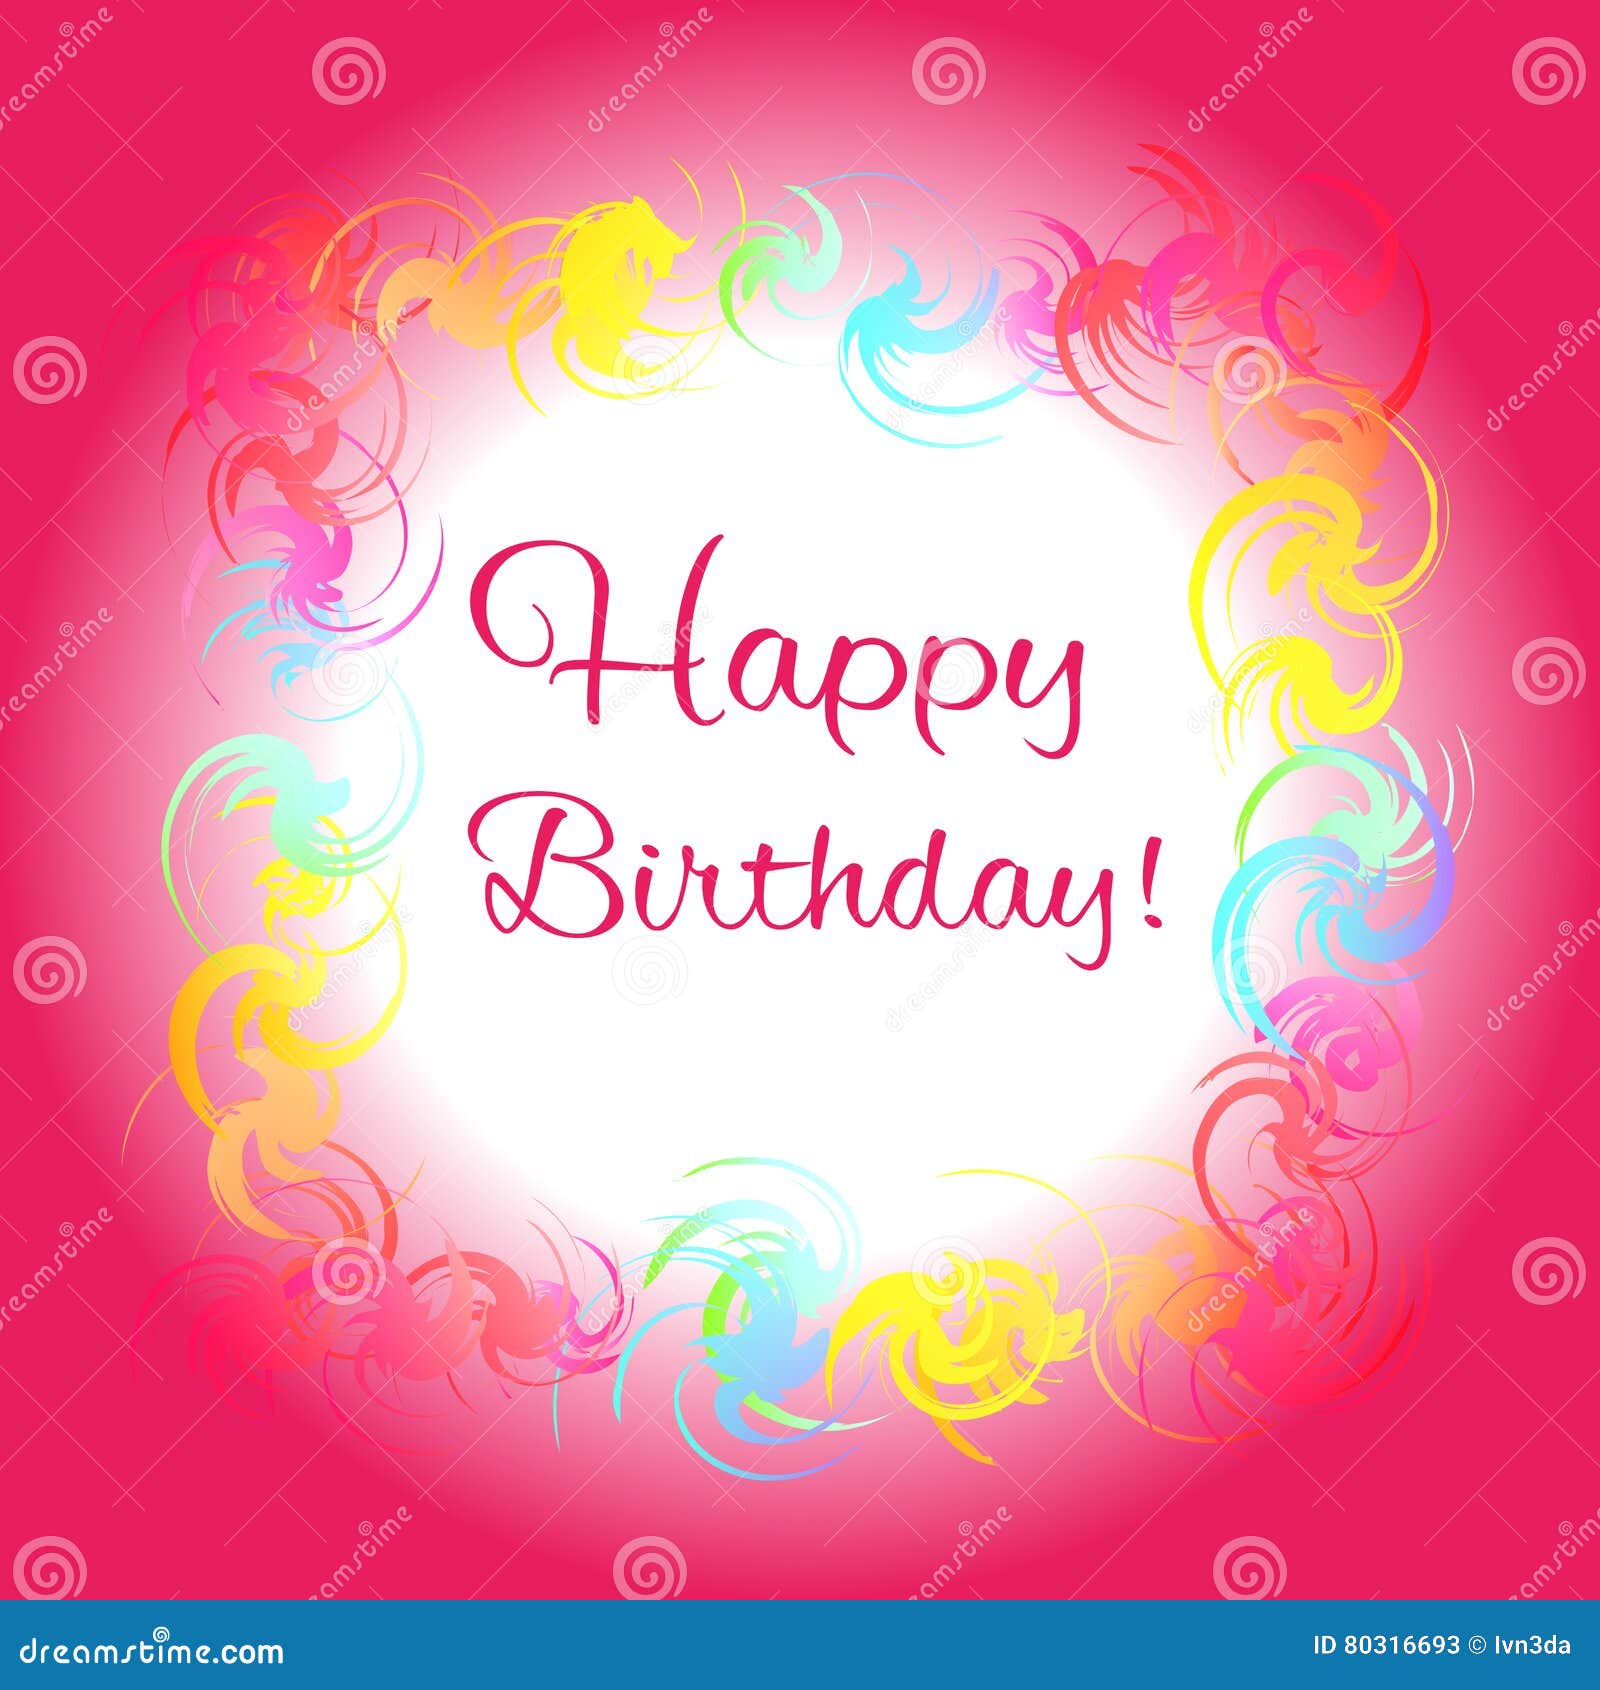 Happy Birthday Red Greeting Card Stock Vector - Illustration of cute ...